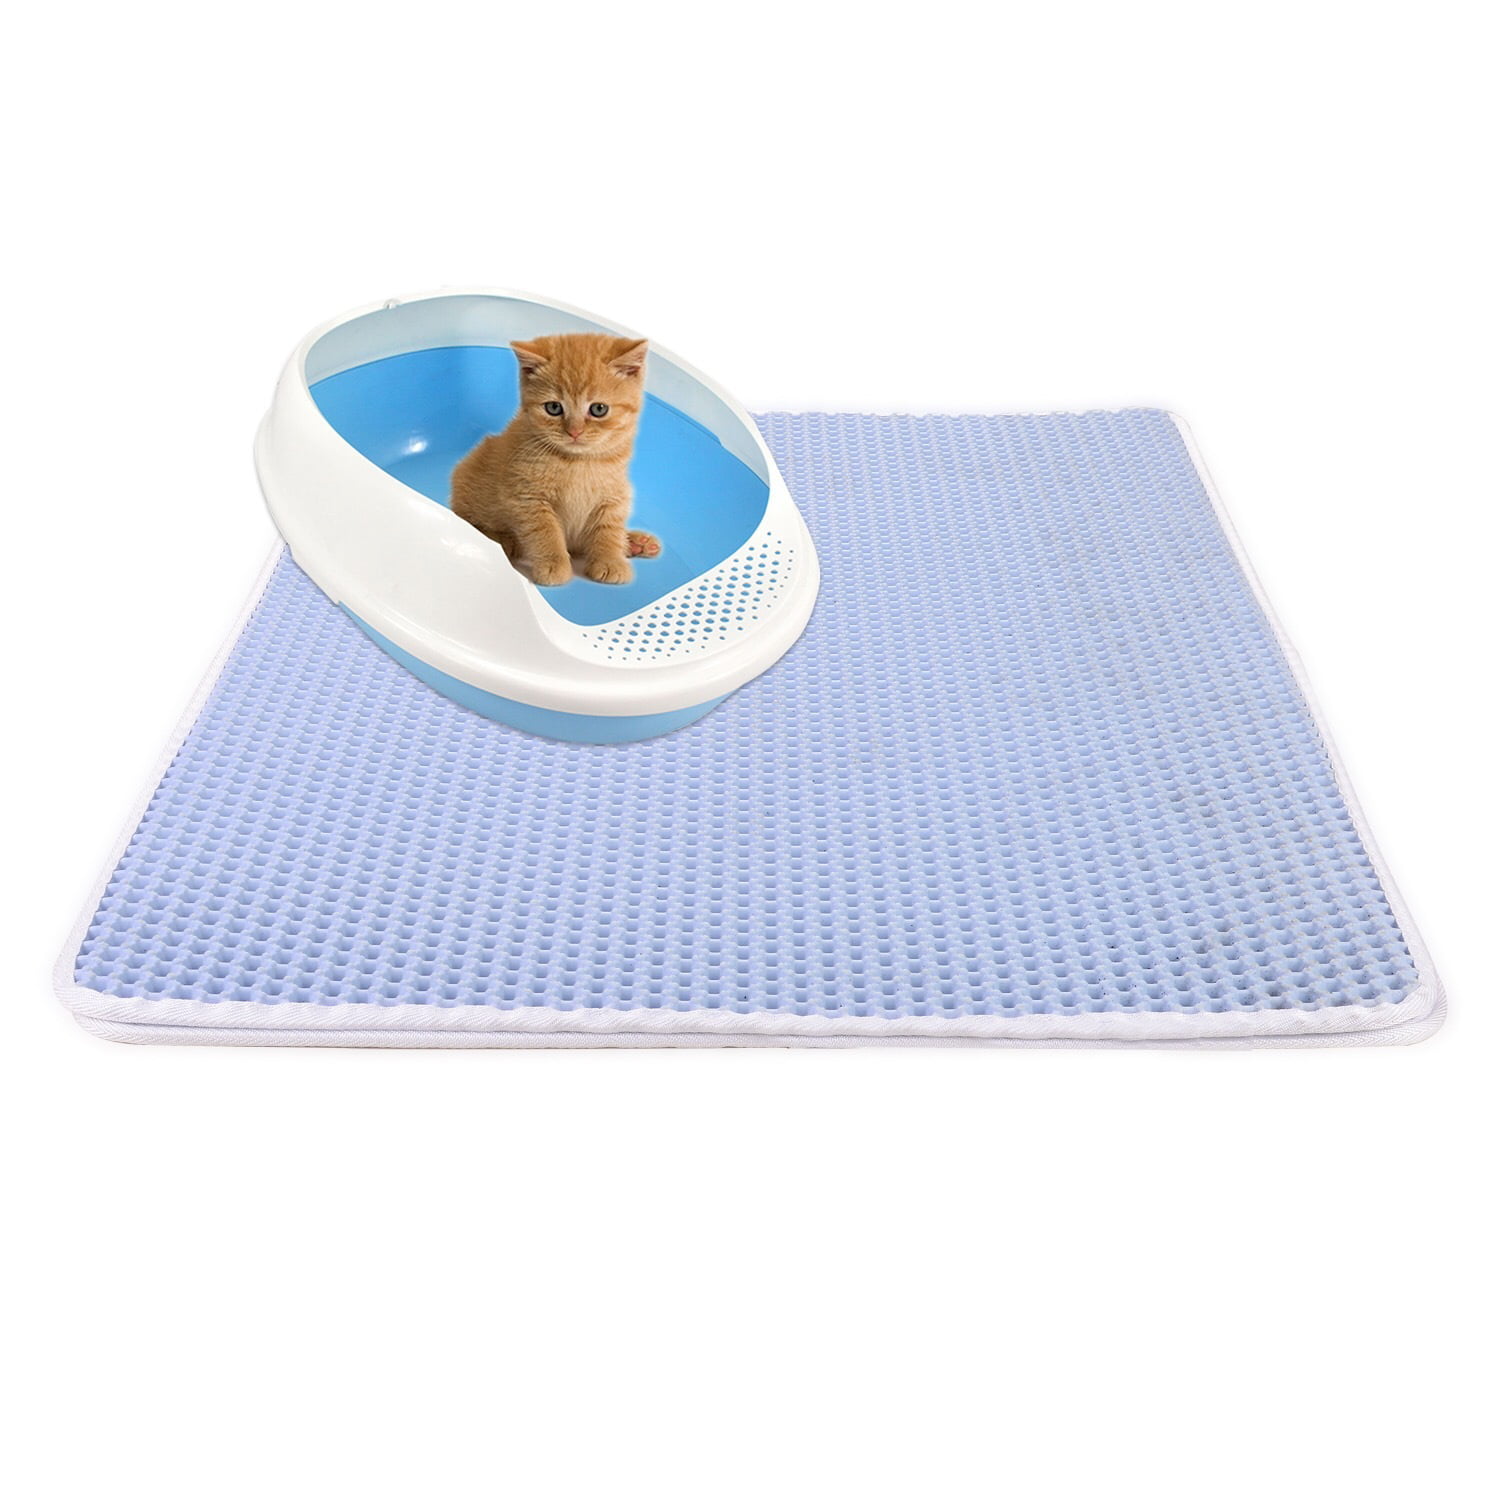 Washable Litter Trapper Catcher for Floor Litter Box Rug Carpet Urine Waterproof Honeycomb Double Layer Scatter Control No Phthalate WePet Cat Litter Mat Easy Clean Kitty Litter Trapping Mat